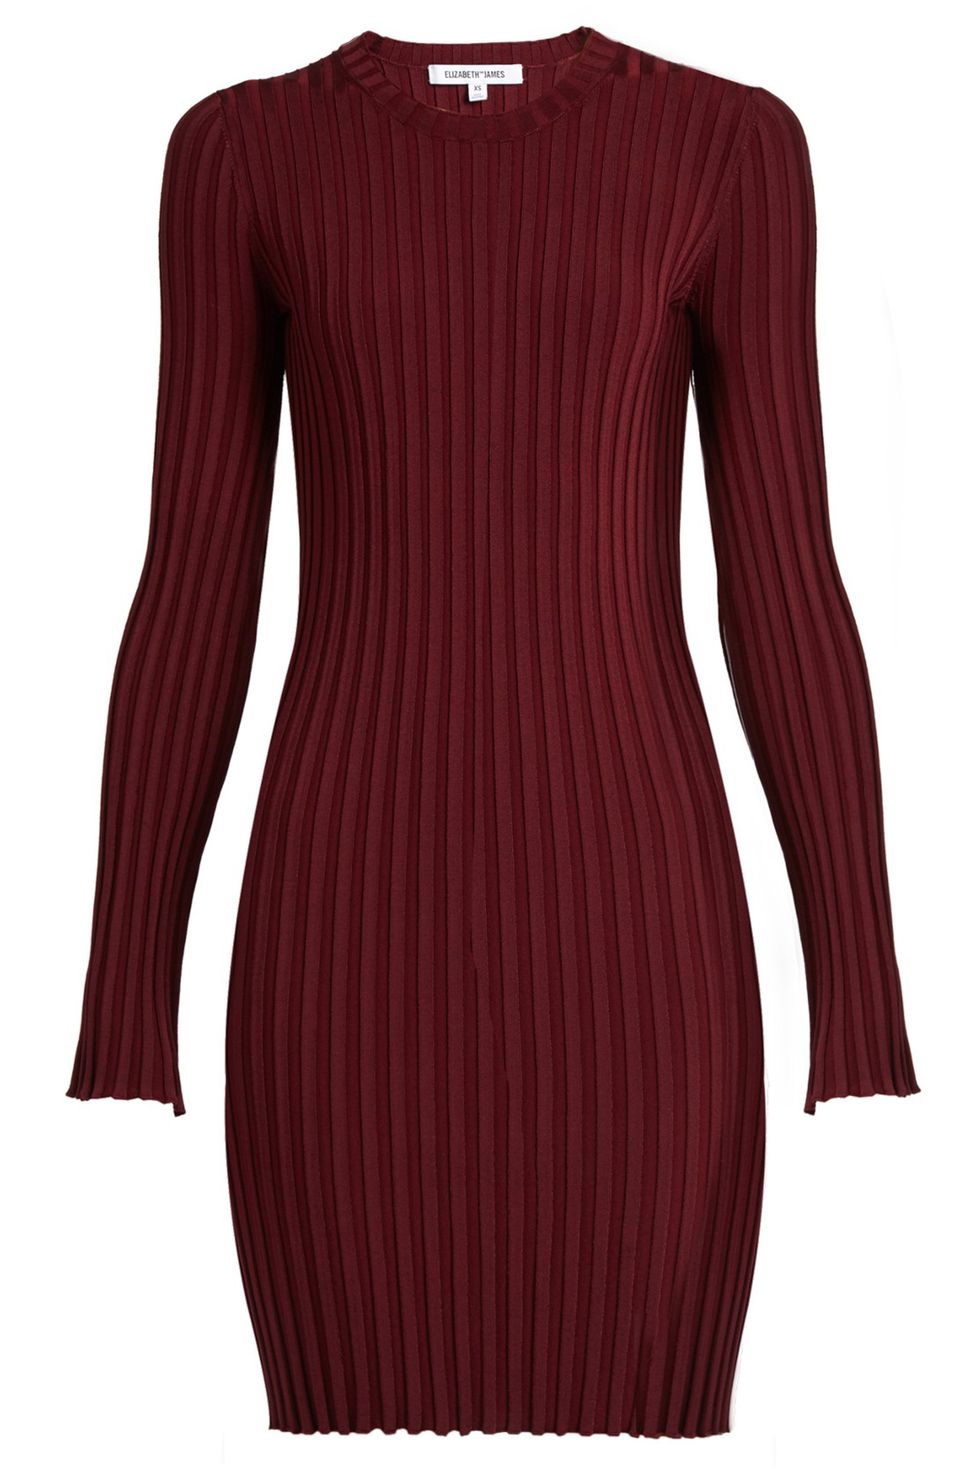 knitted dresses, knit dresses